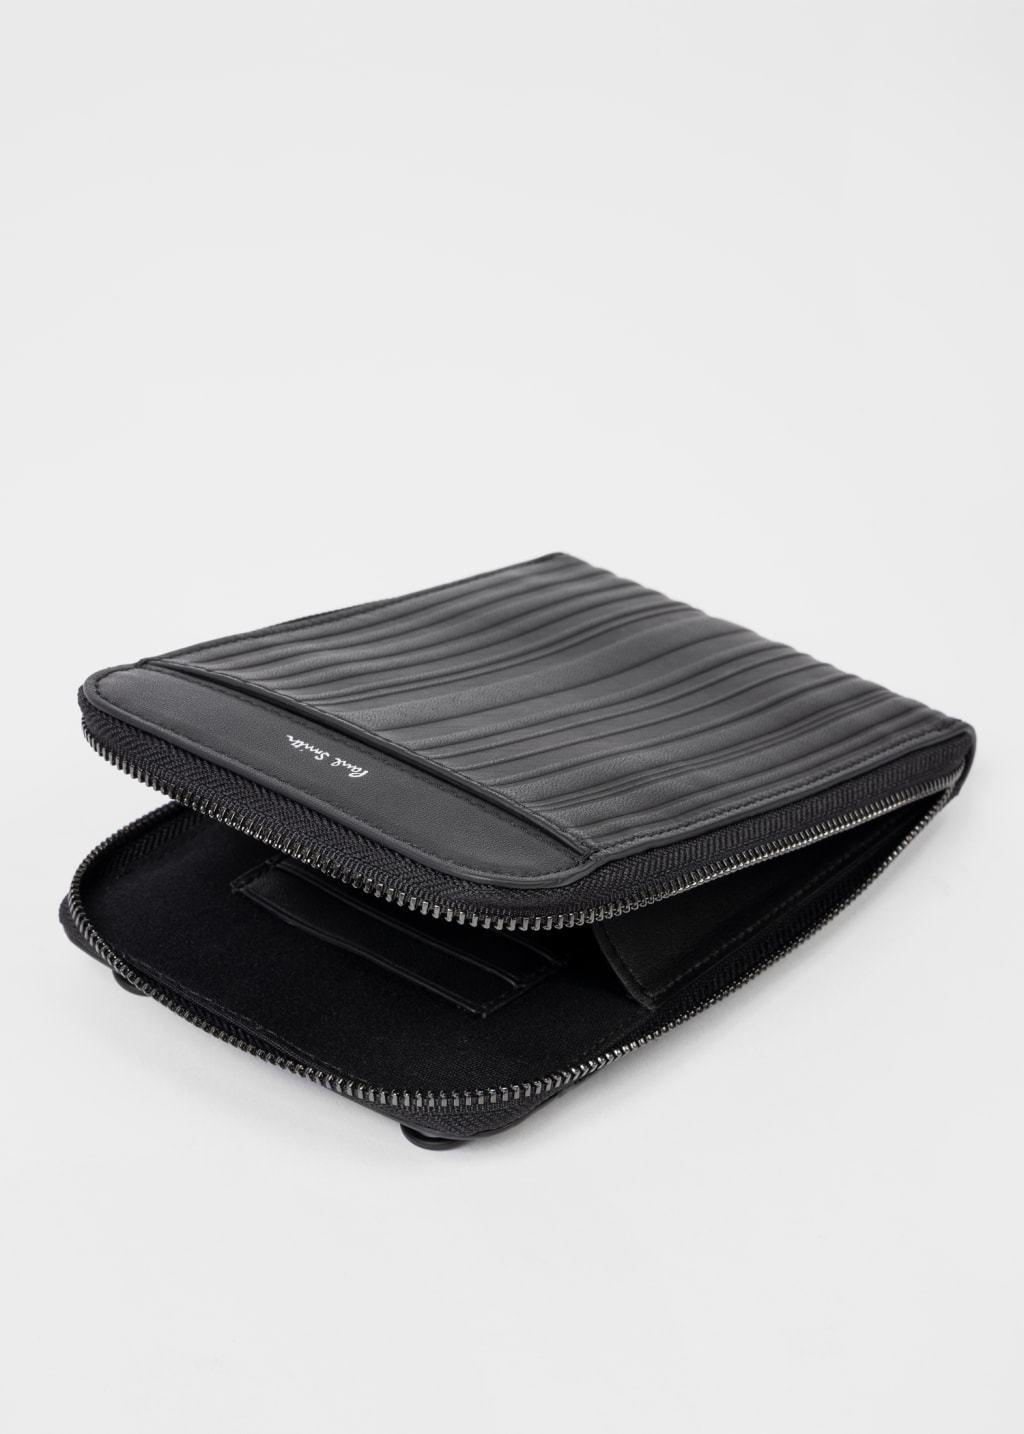 Detail View - Black Leather 'Shadow Stripe' Phone Wallet Bag Paul Smith